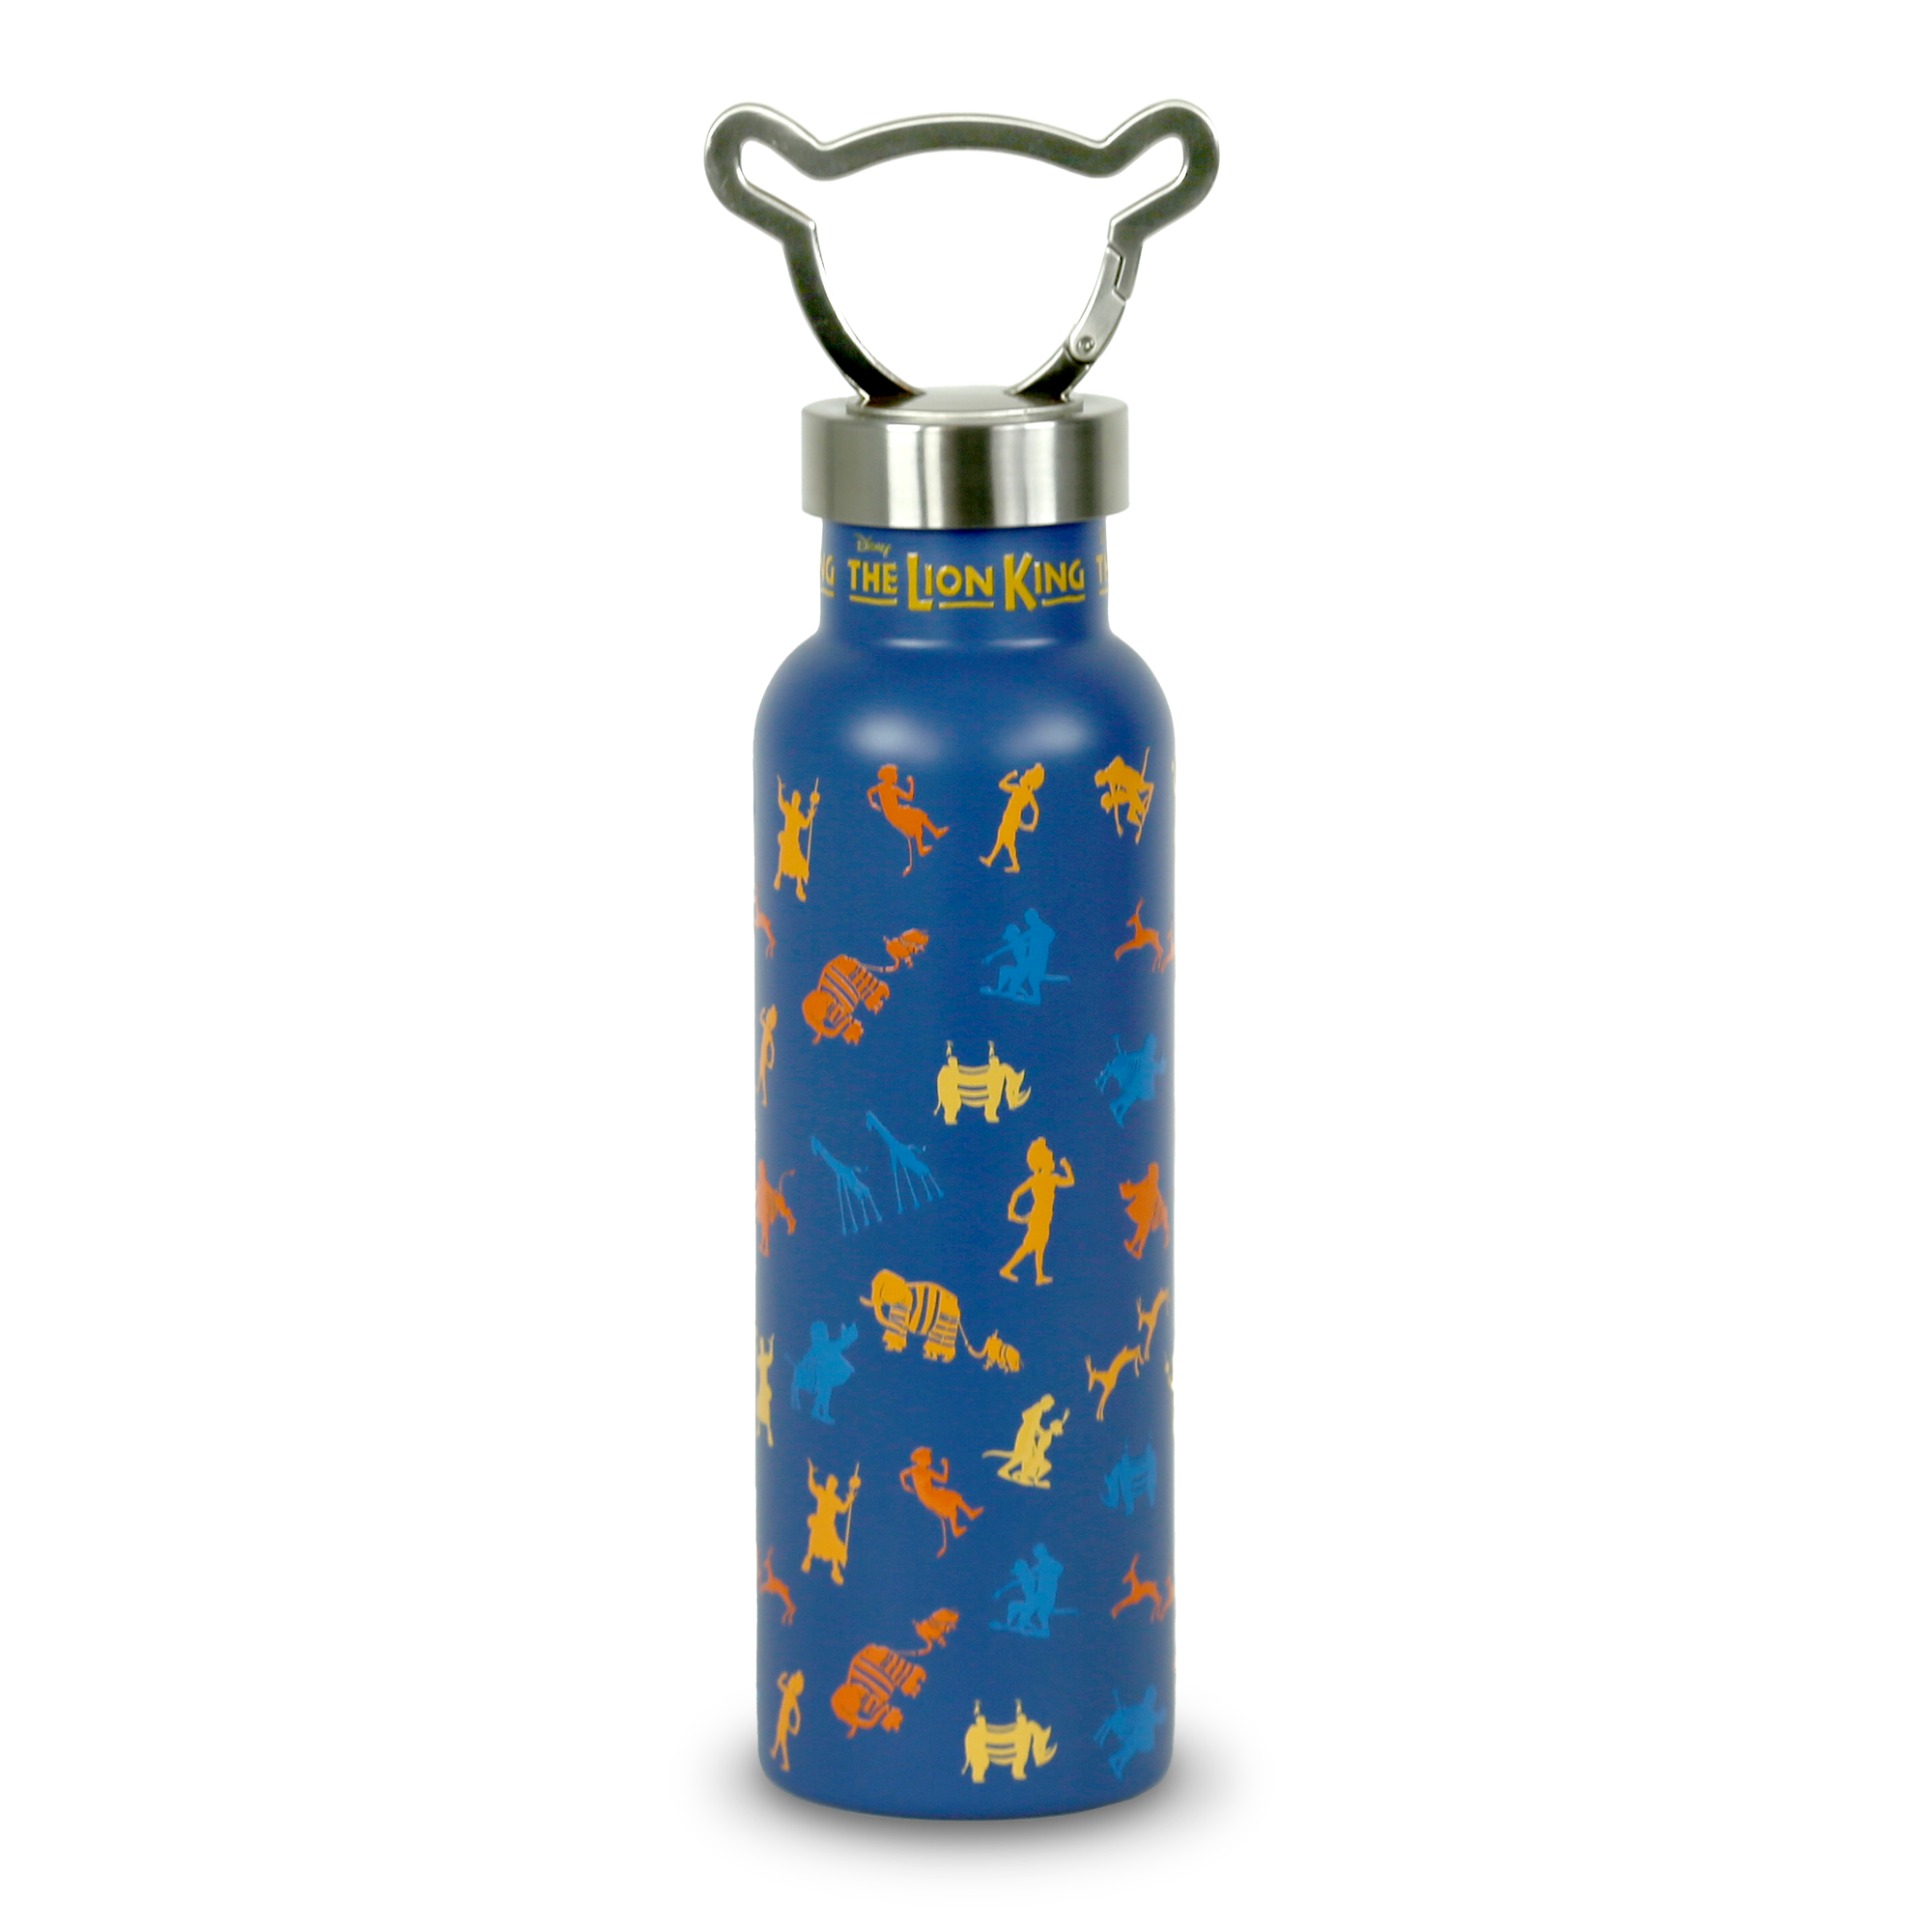 The Lion King the Broadway Musical - Circle of Life Water Bottle